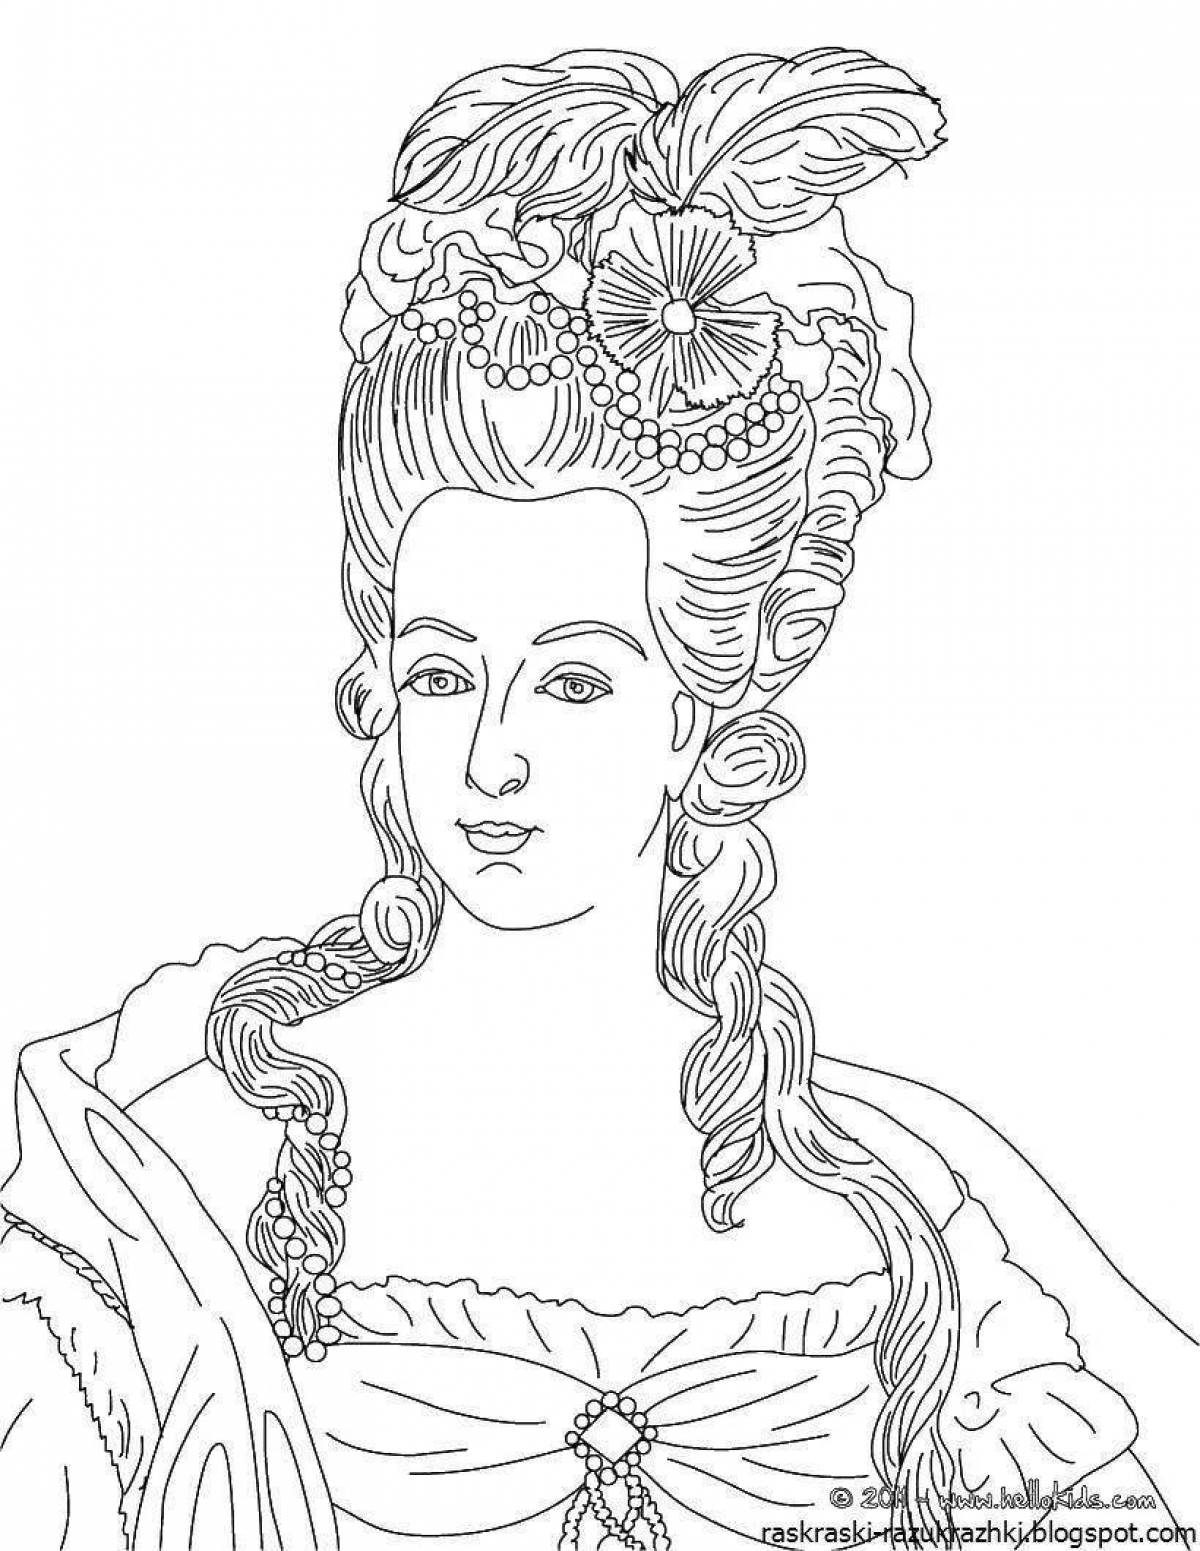 Coloring ekaterina 2 coloring pages